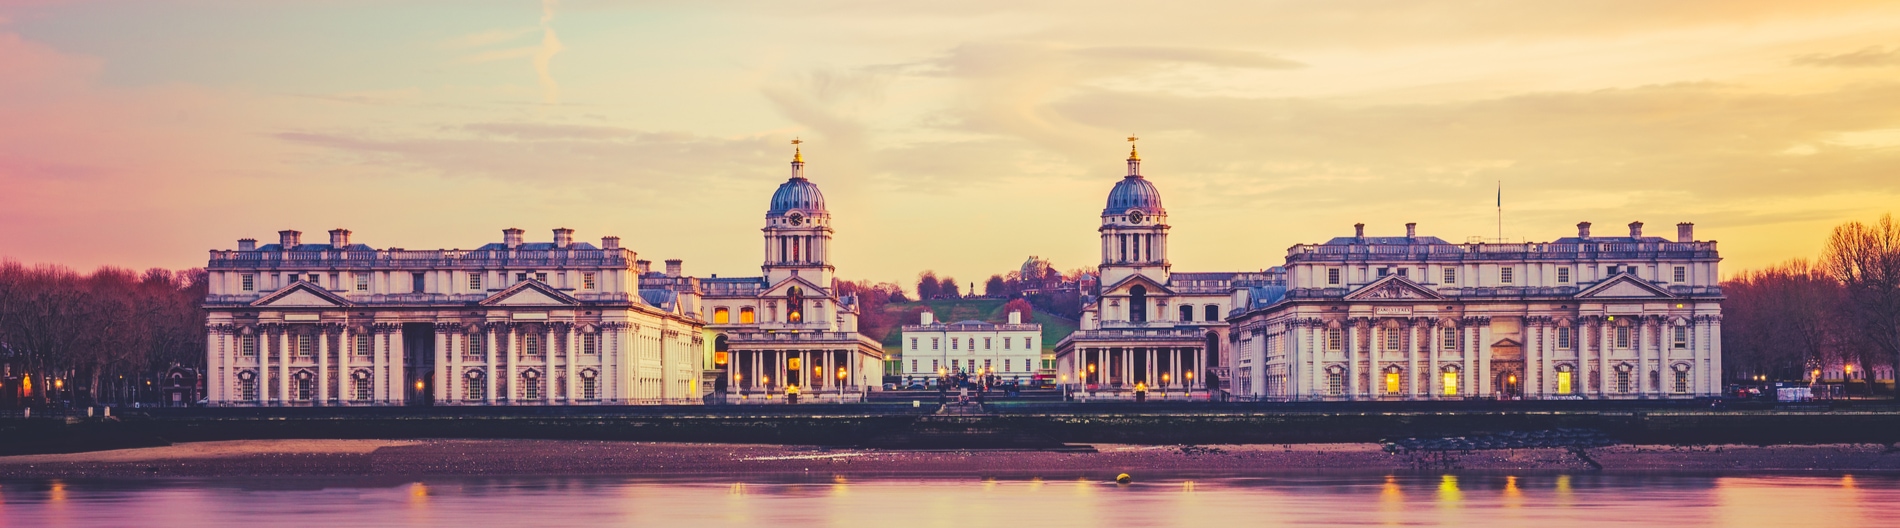 the old royal naval college in greenwich